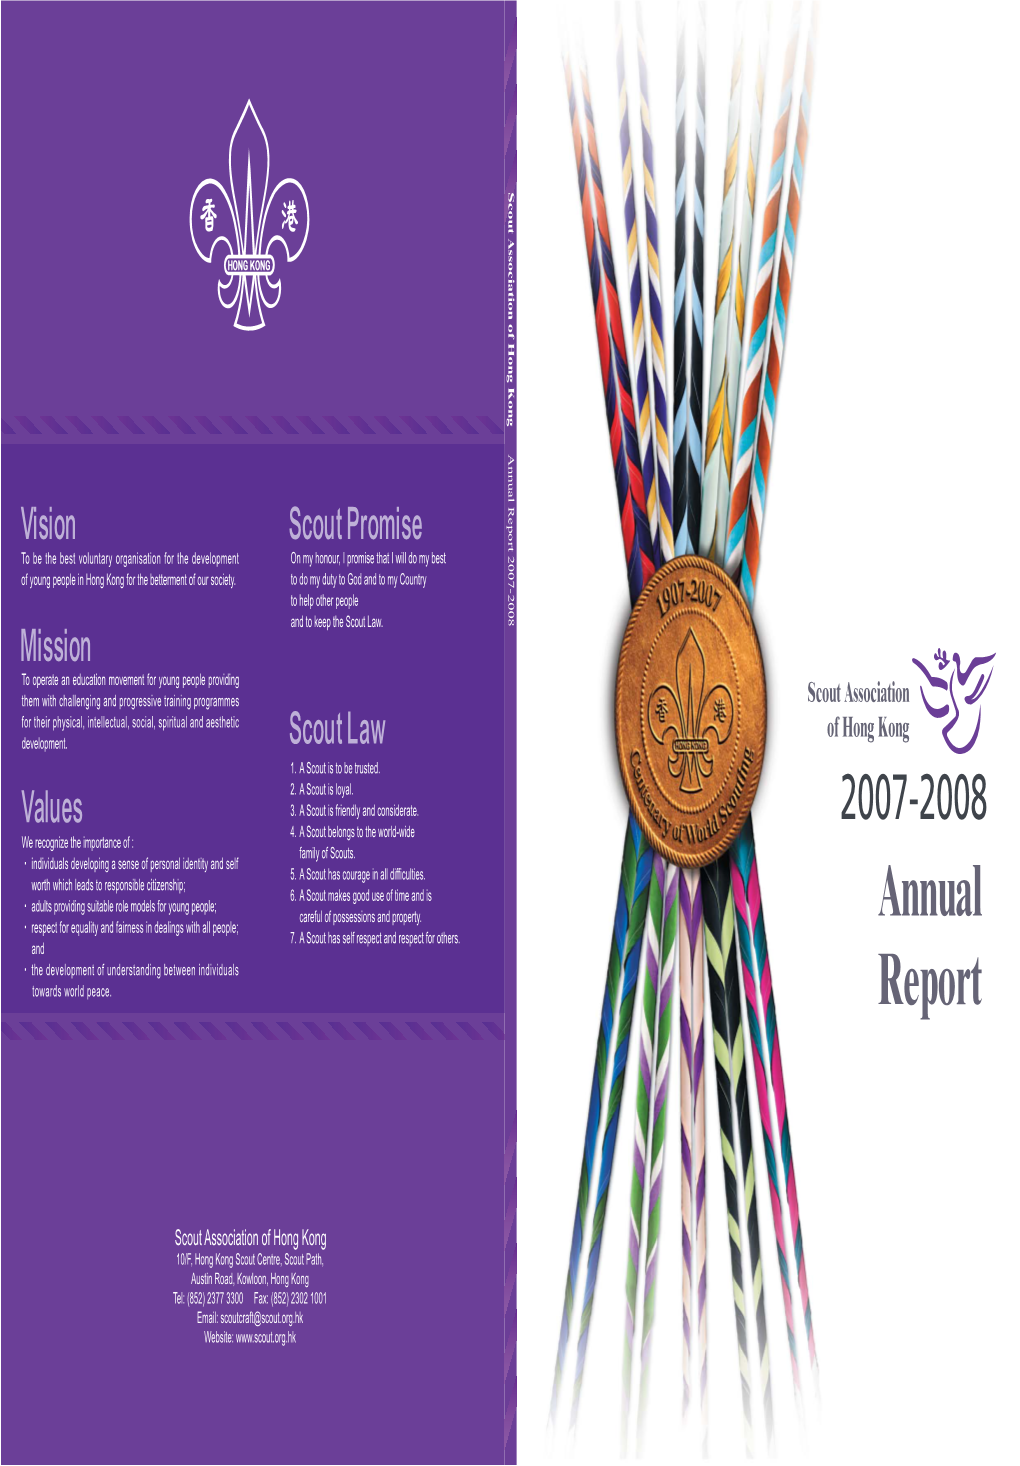 Annual Report 2007-08 ENG.Pdf